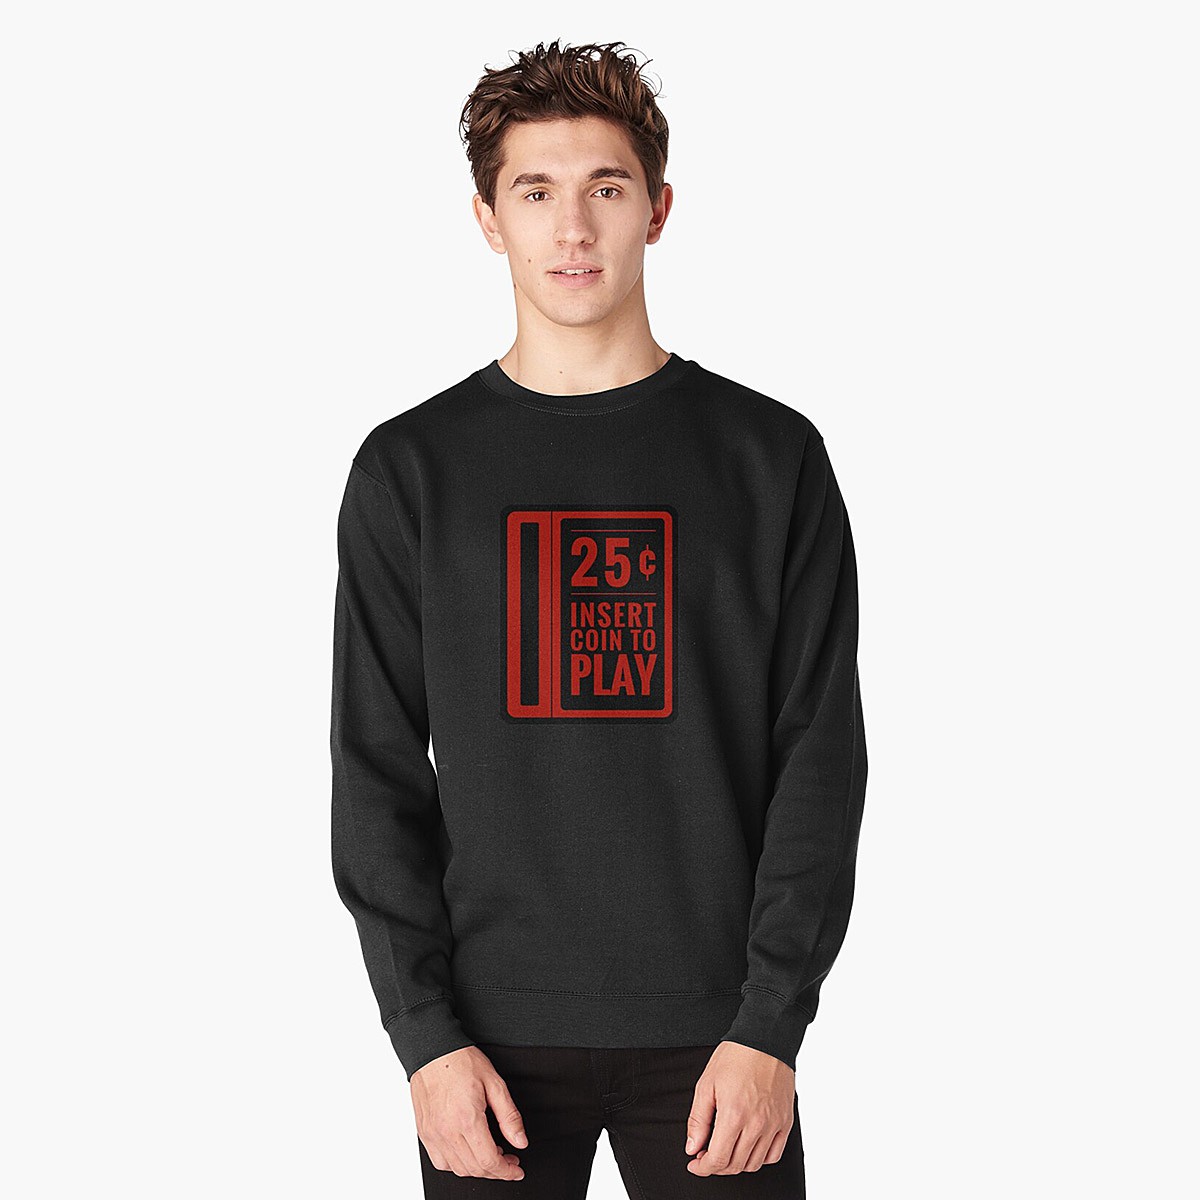 Insert Coin arcade coin slot - Pullover Sweatshirt by NTK Apparel